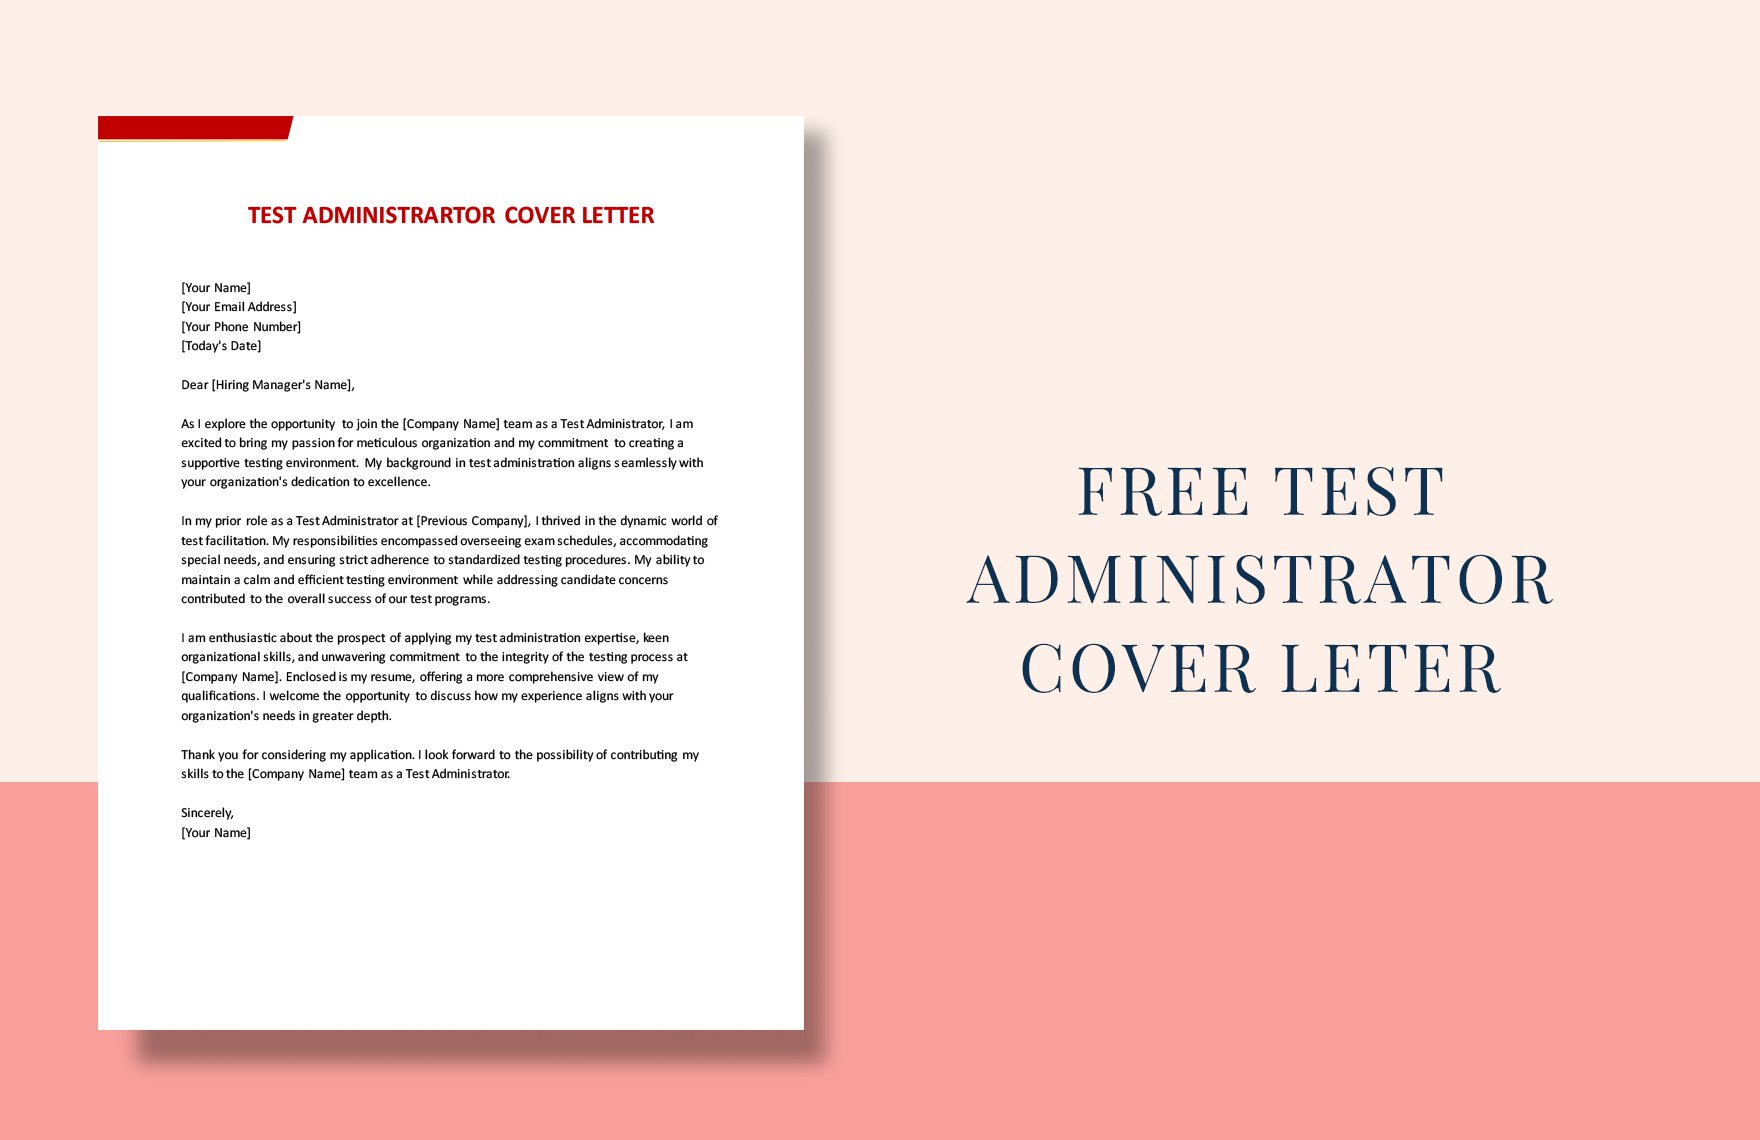 Free Test Administrator Cover Letter in Word, PDF